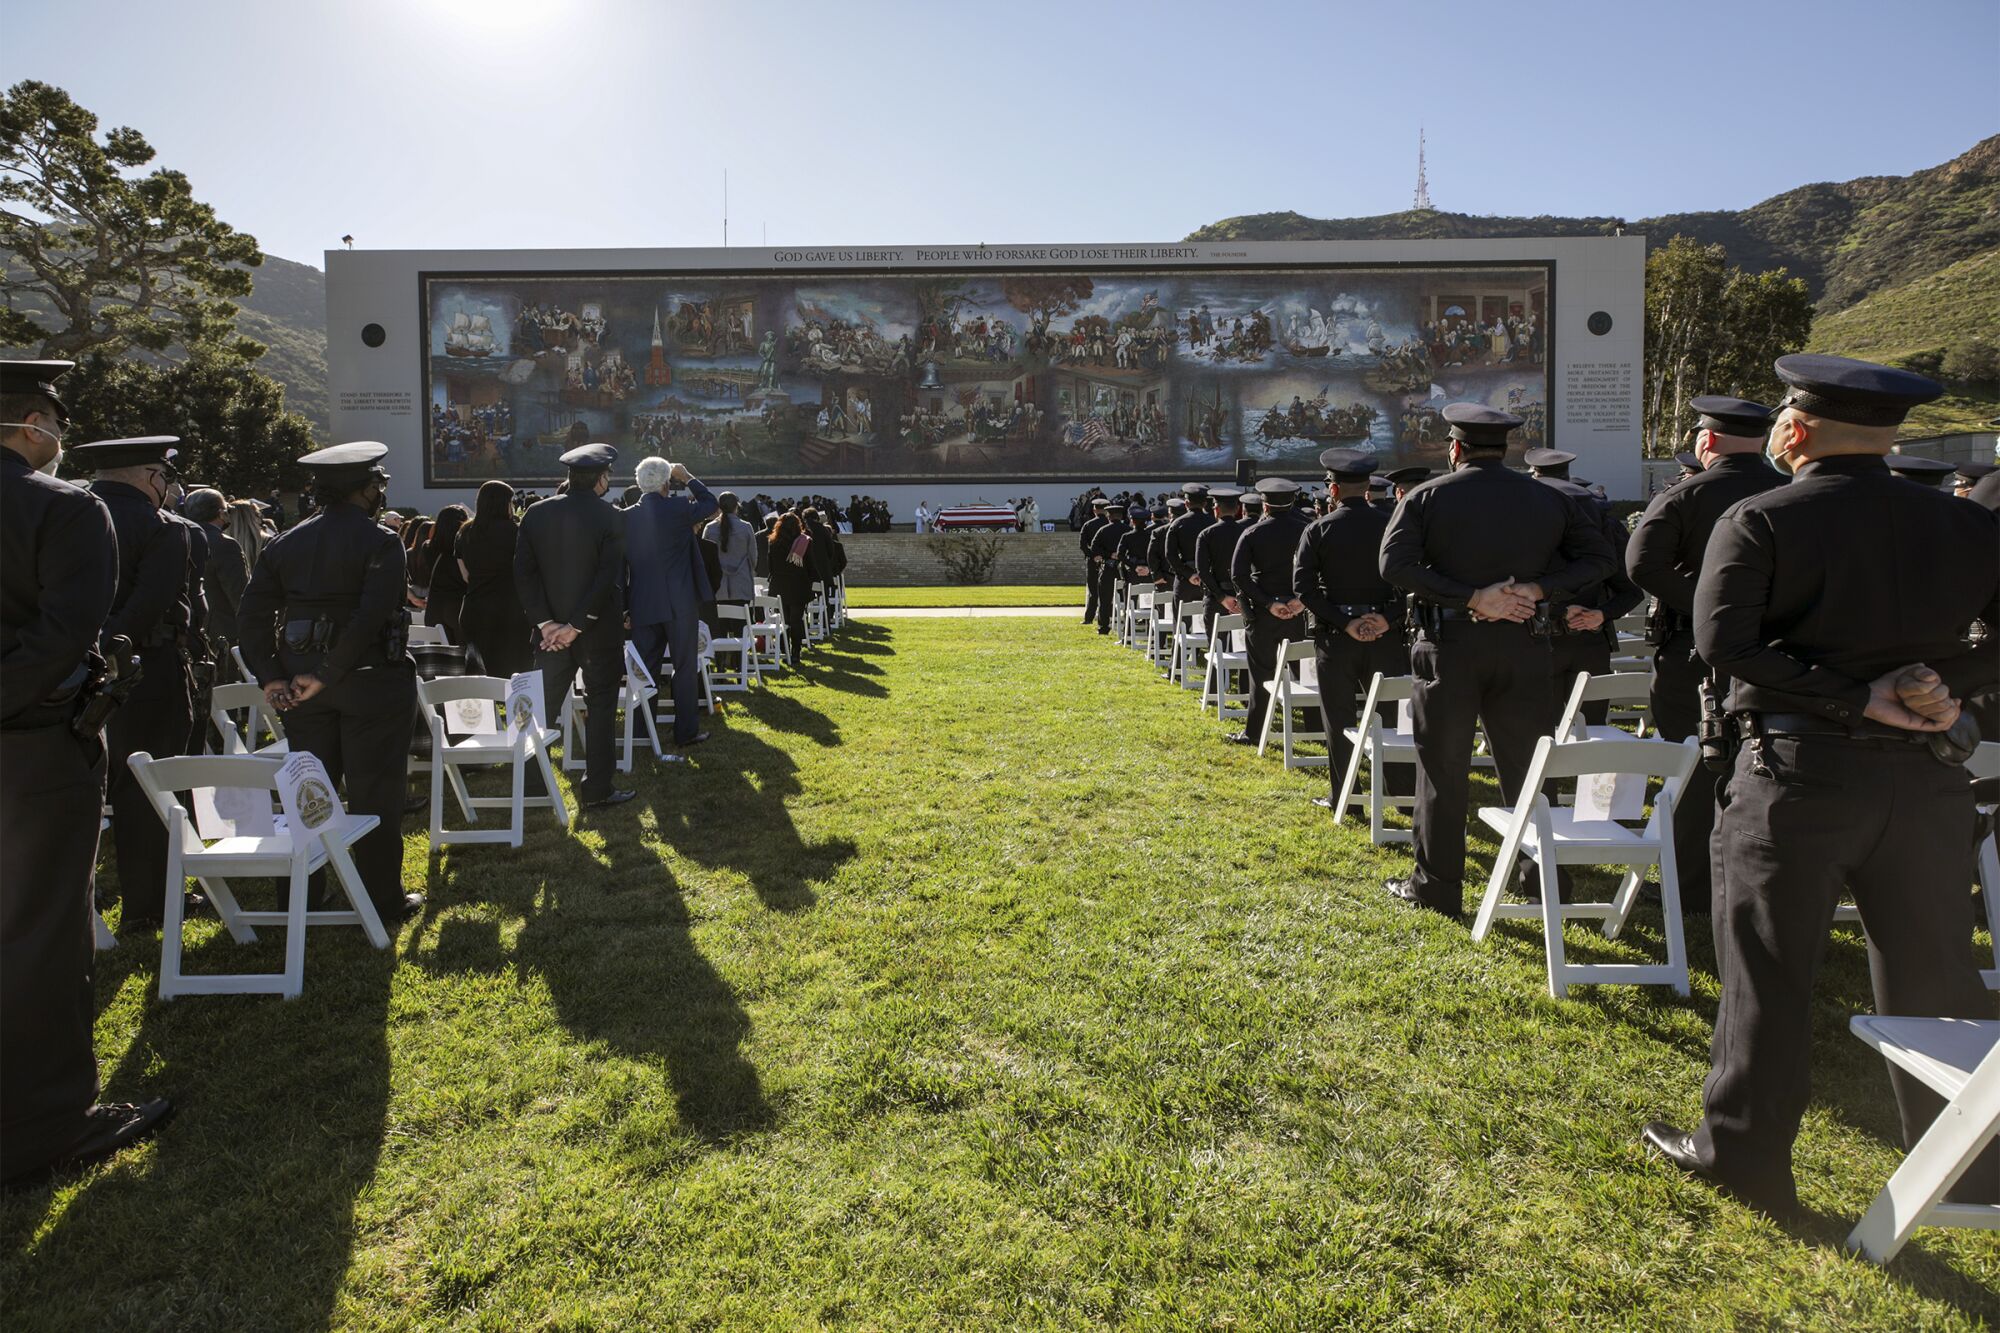 People attend a funeral at Forest Lawn-Hollywood Hills in front of the 'Birth of Liberty' mosaic.